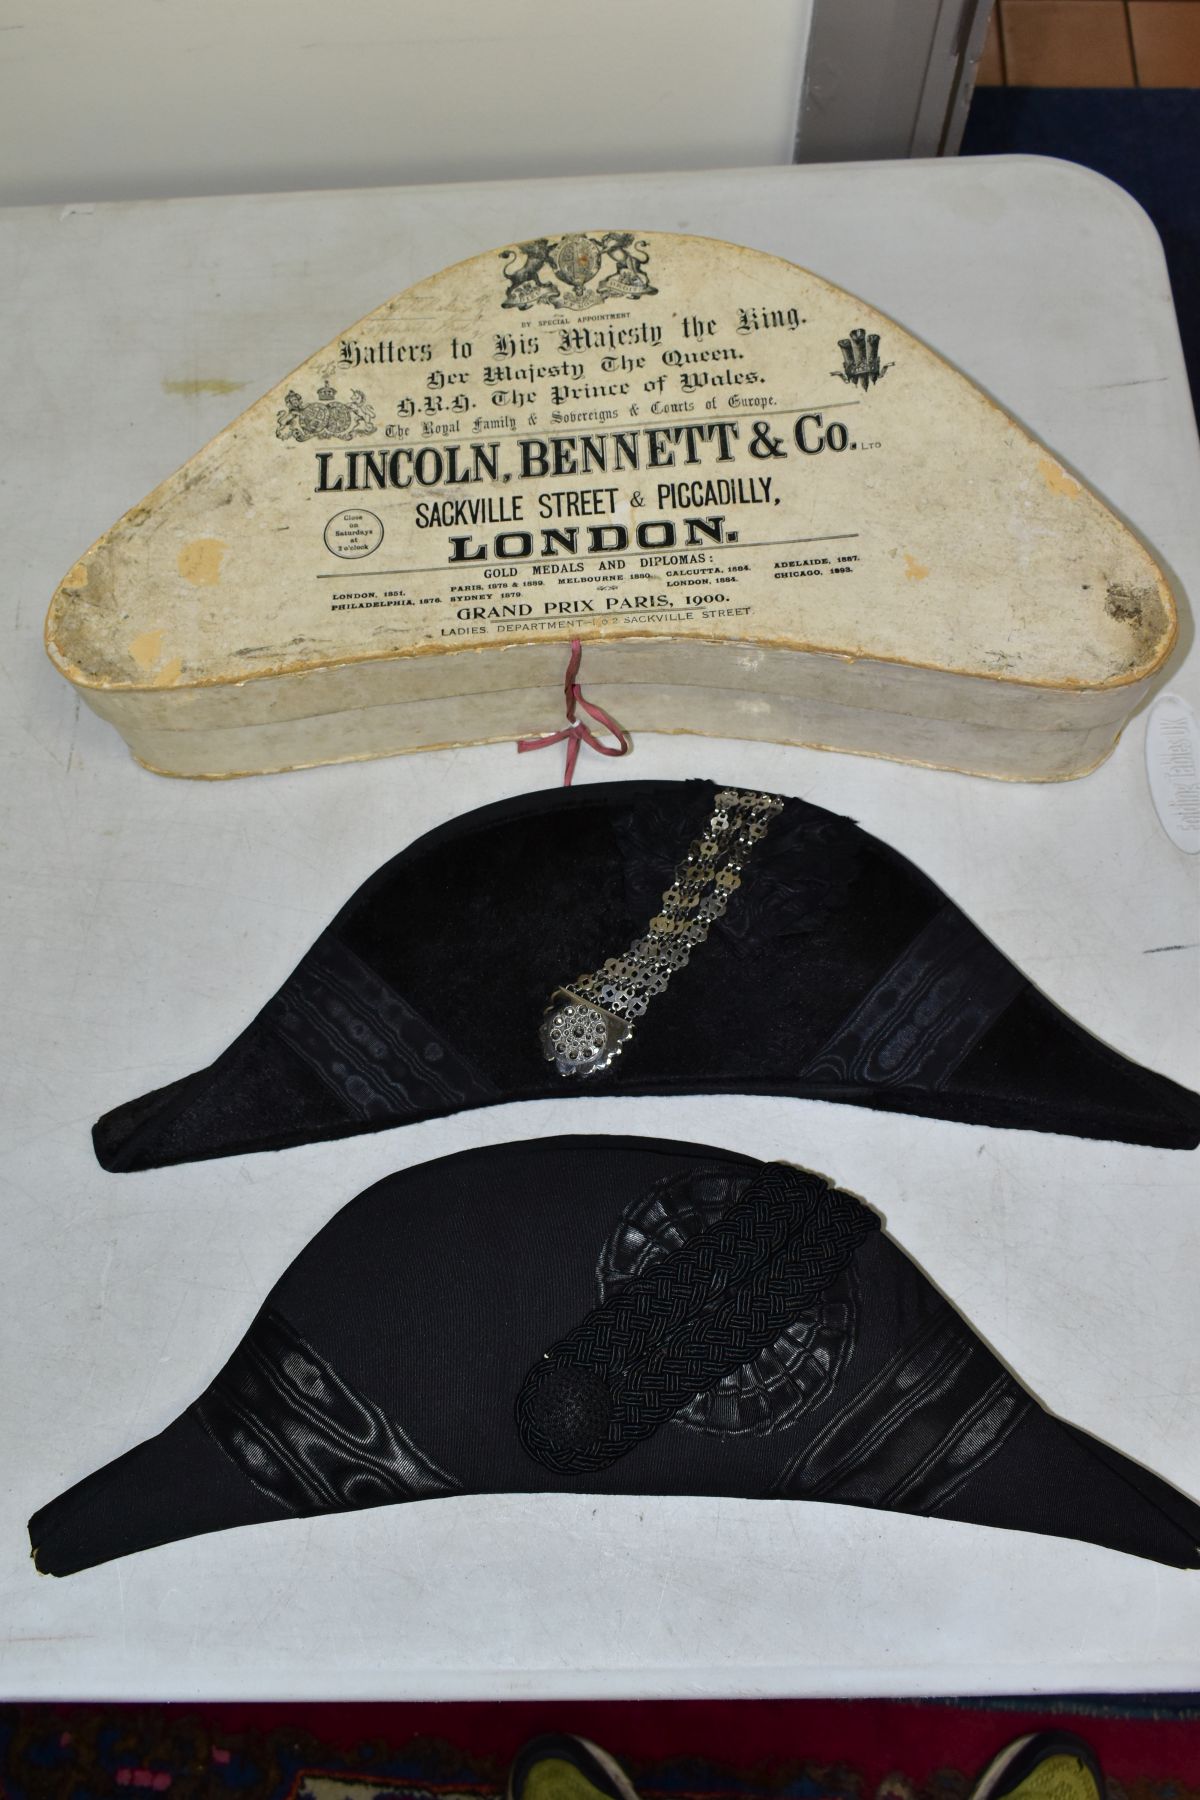 A BICORN HAT BY LINCOLN, BENNETT & CO, together with hat box with printed information for Lincoln